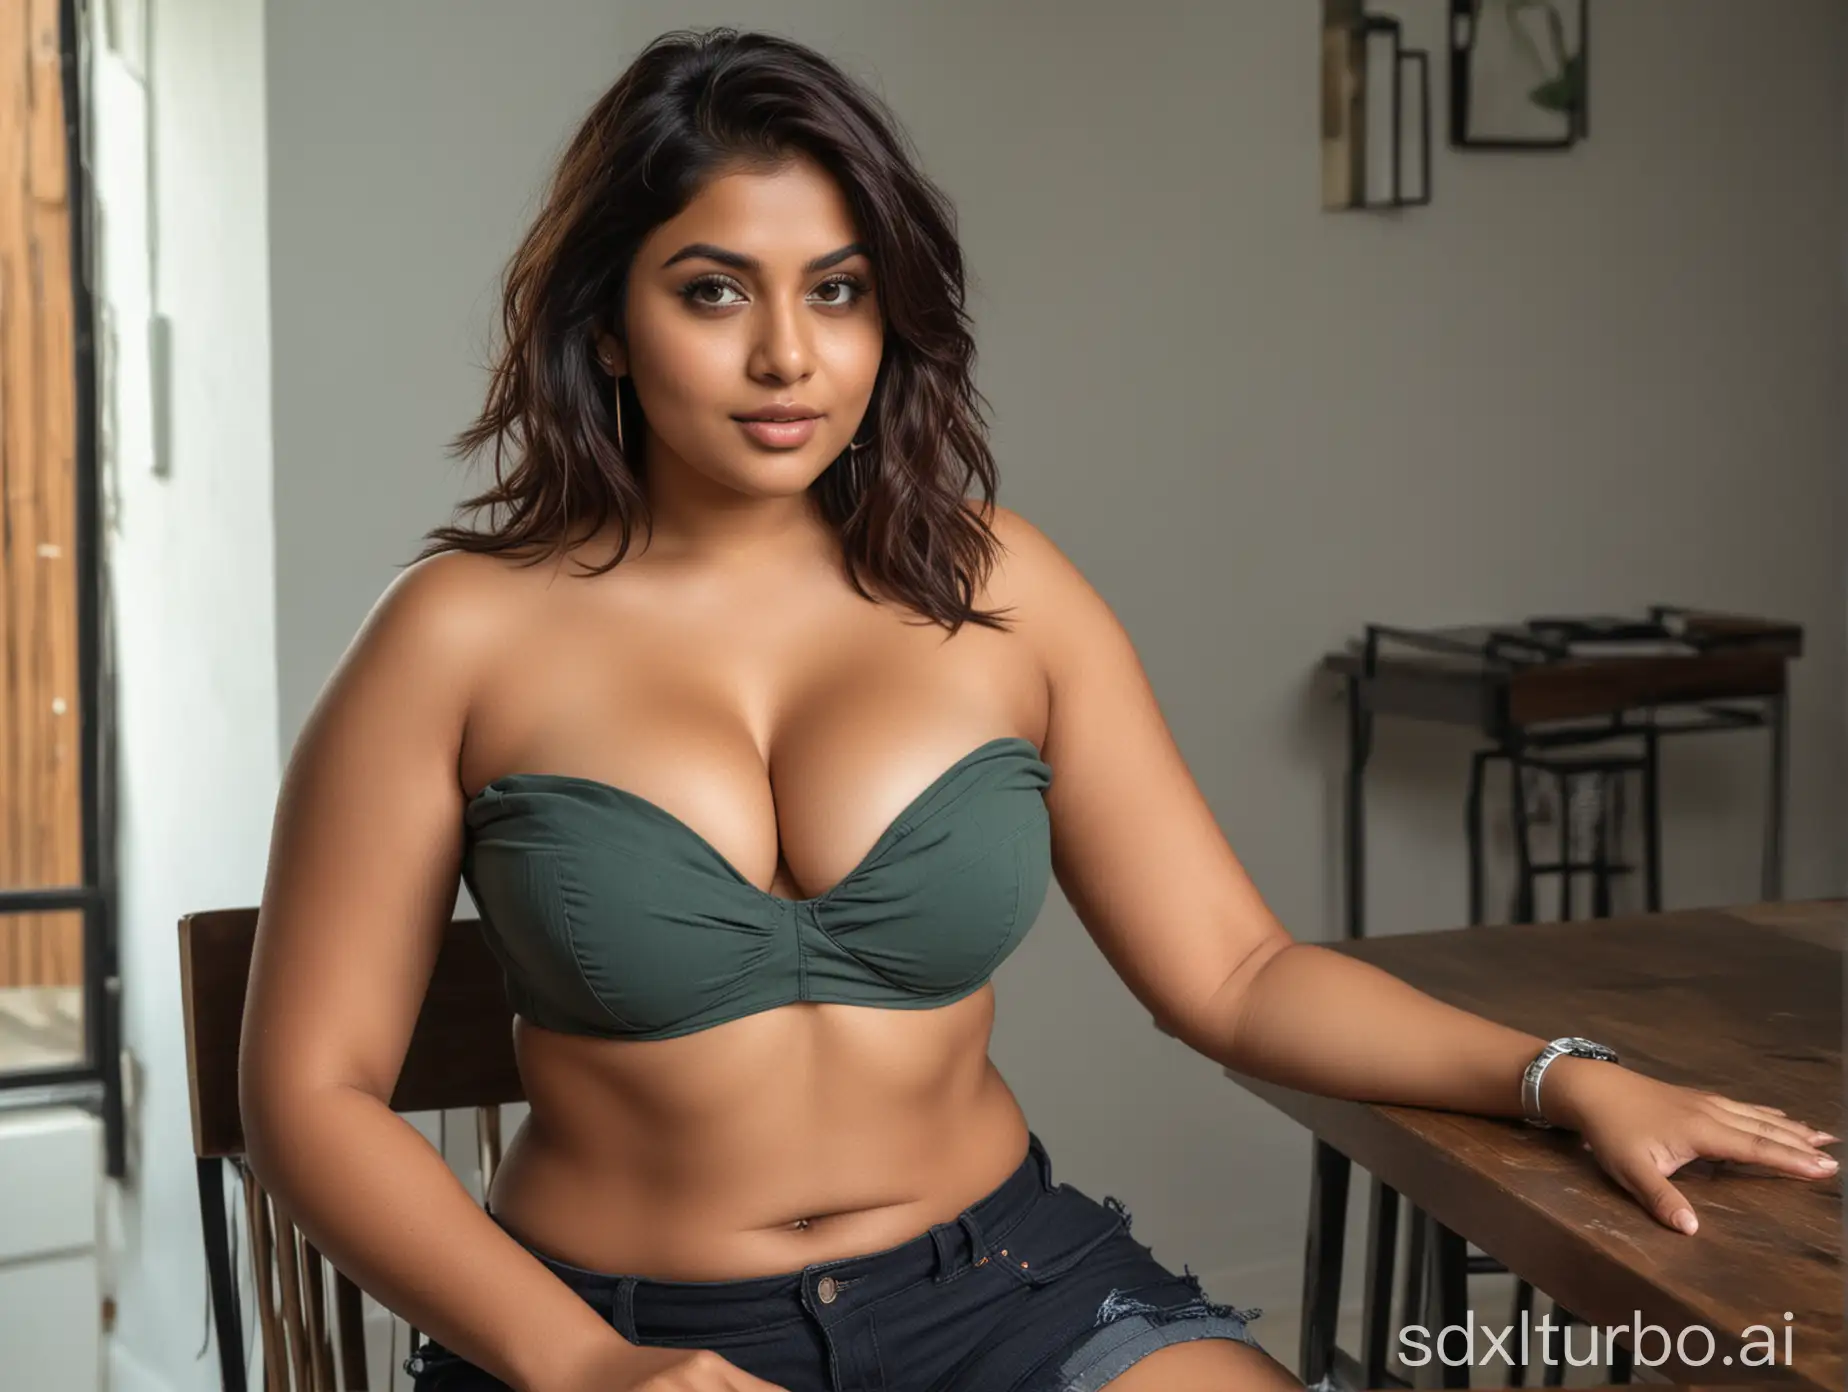 Curvy and busty Indian girl with brunette messy layered hair, deep v cleavages, sitting on chair across the table. Wearing a unbuttoned strapless crop top.